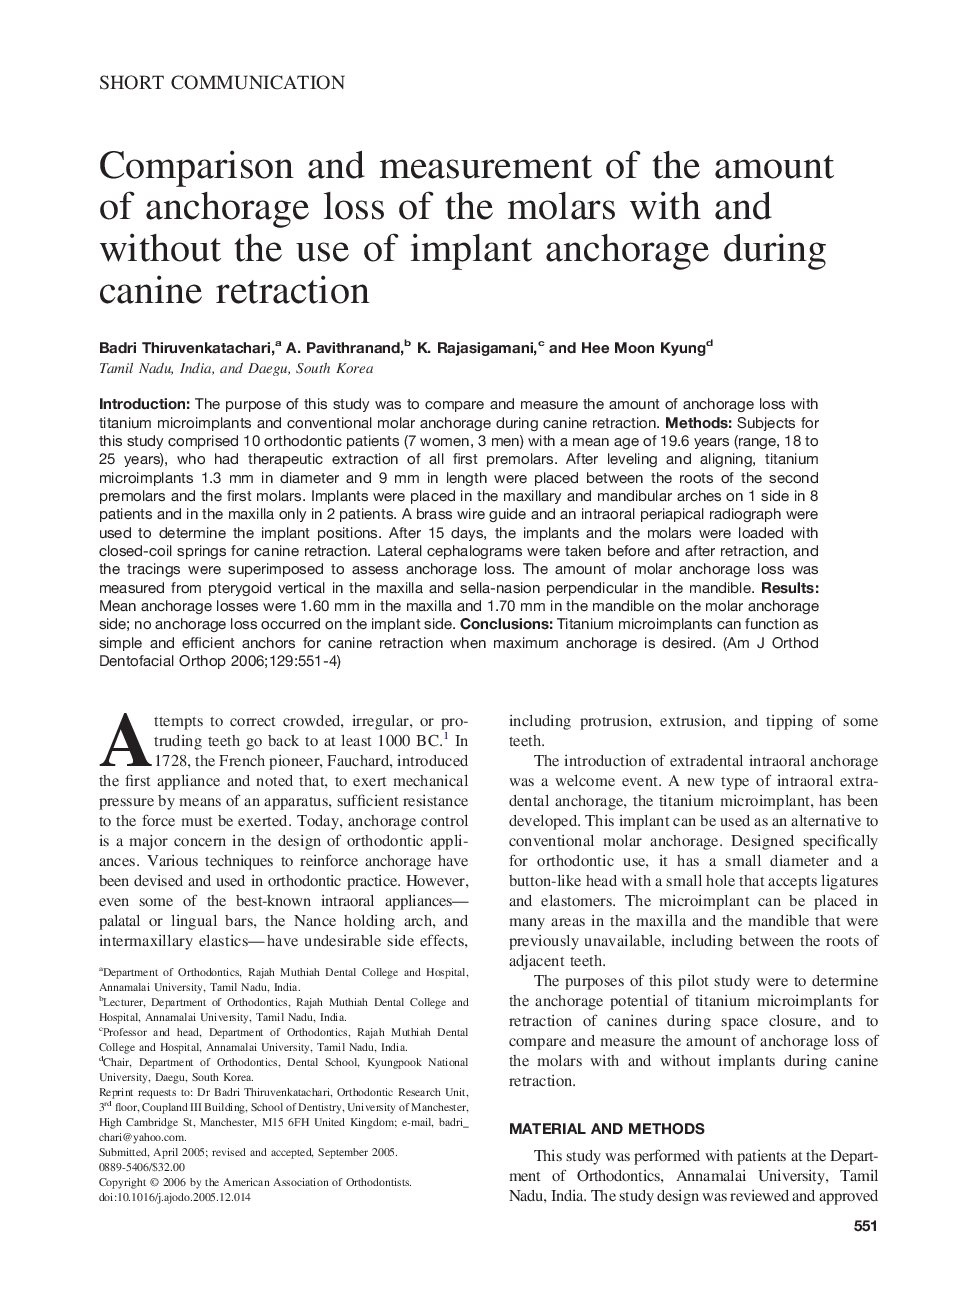 Comparison and measurement of the amount of anchorage loss of the molars with and without the use of implant anchorage during canine retraction